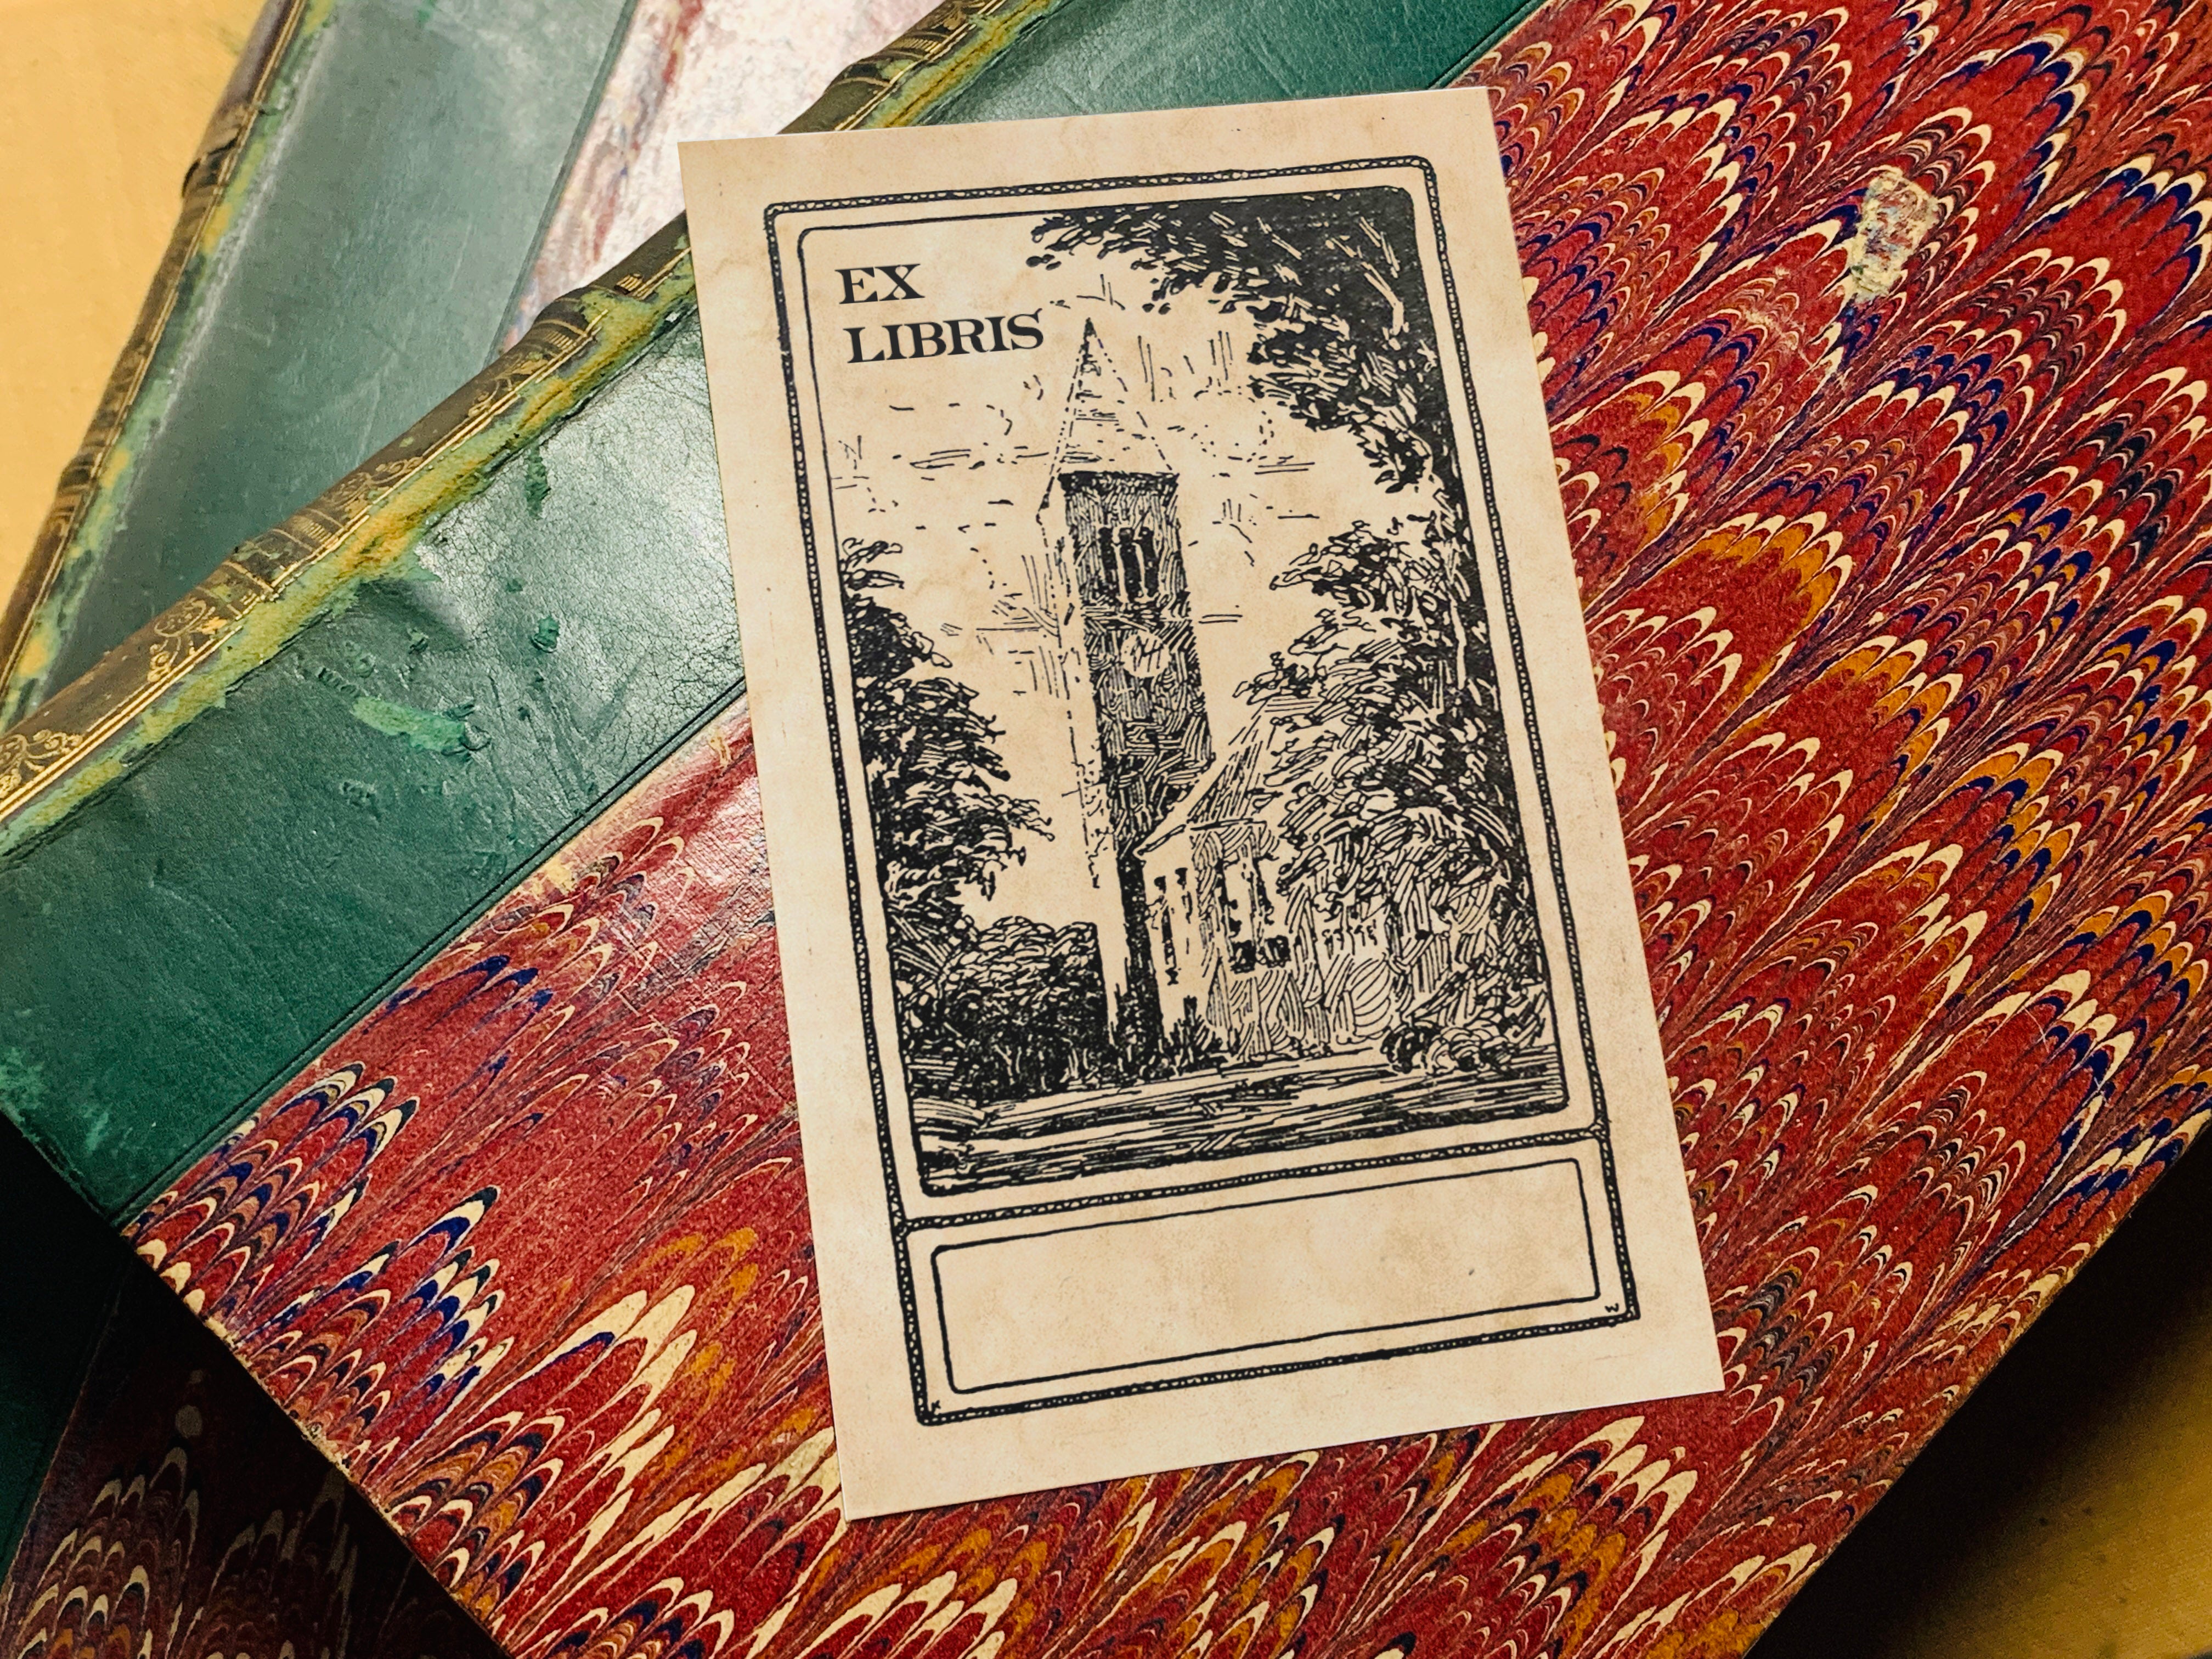 Country Churchyard, Personalized Ex-Libris Bookplates, Crafted on Traditional Gummed Paper, 2.5in x 4in, Set of 30